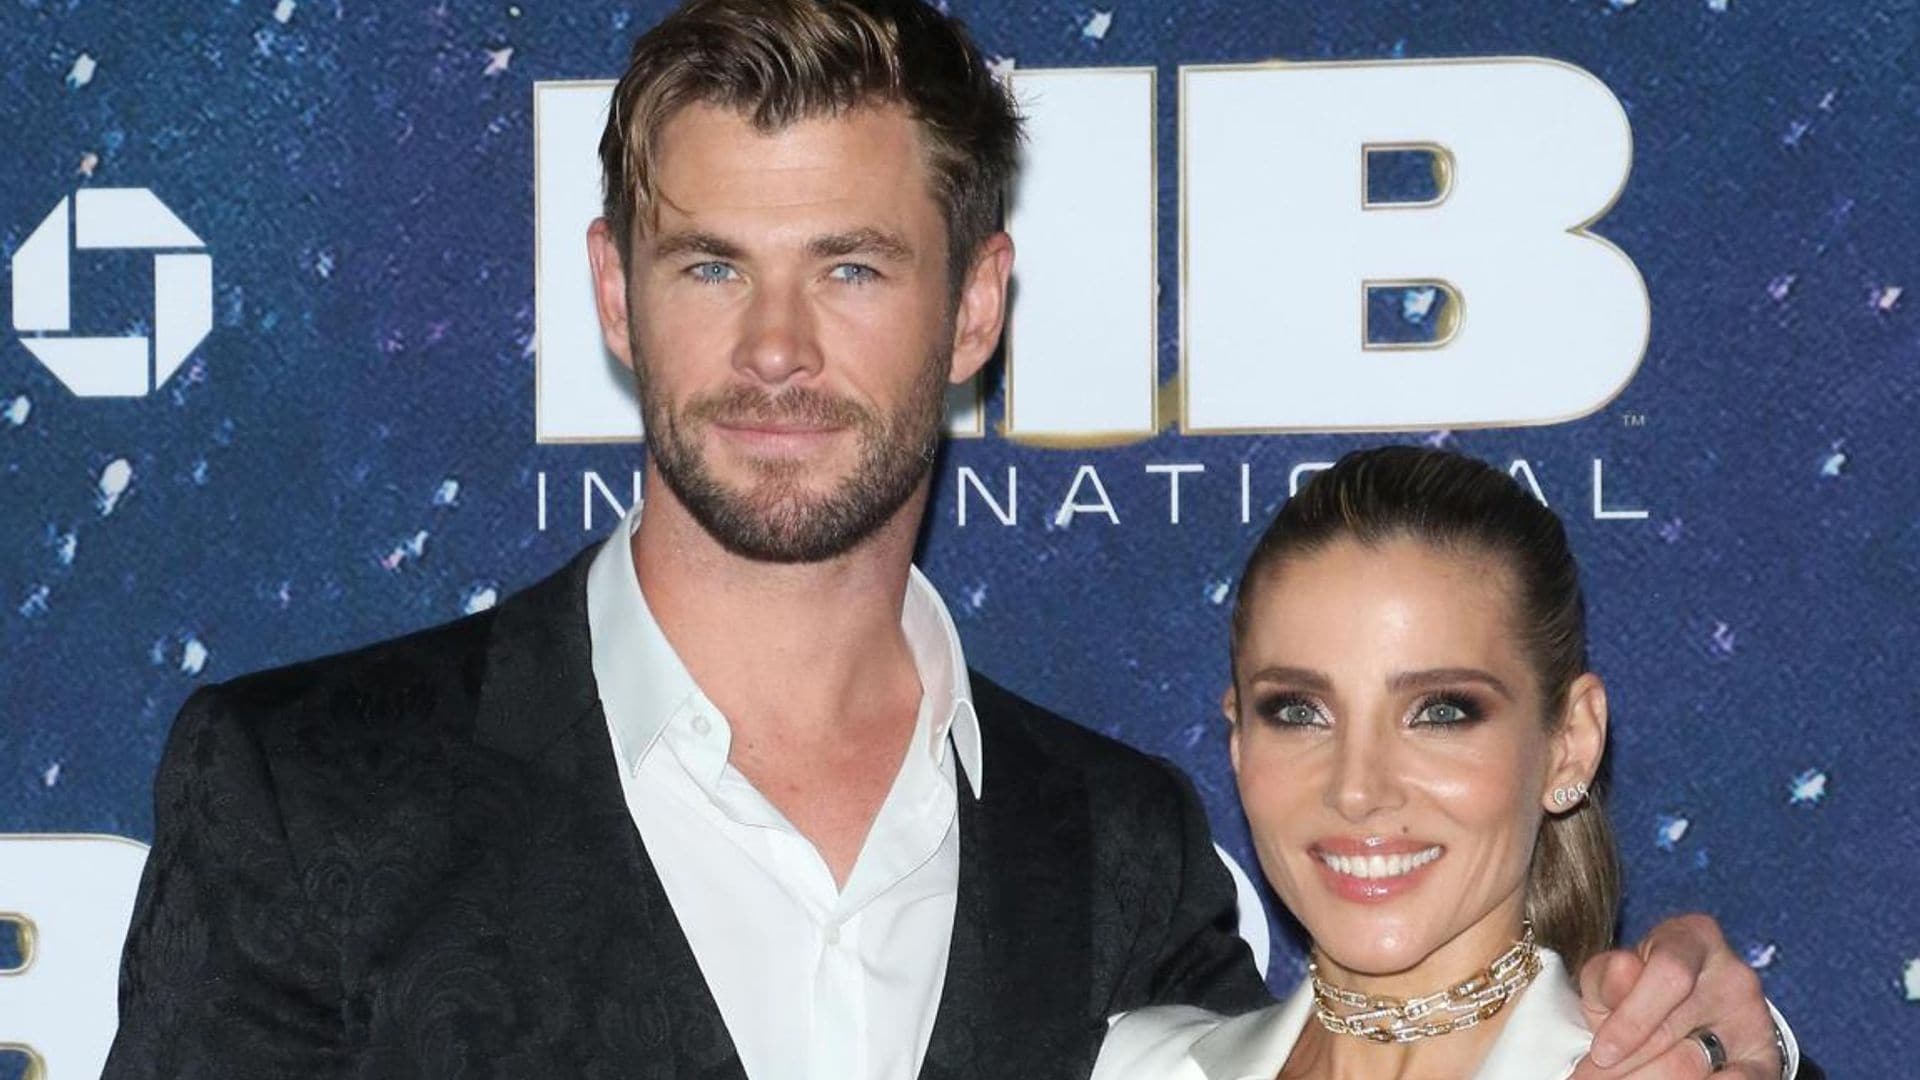 Chris Hemsworth Looks Absolutely Adorable In ‘Late Father’s Day’ Tribute From Wife Elsa Pataky